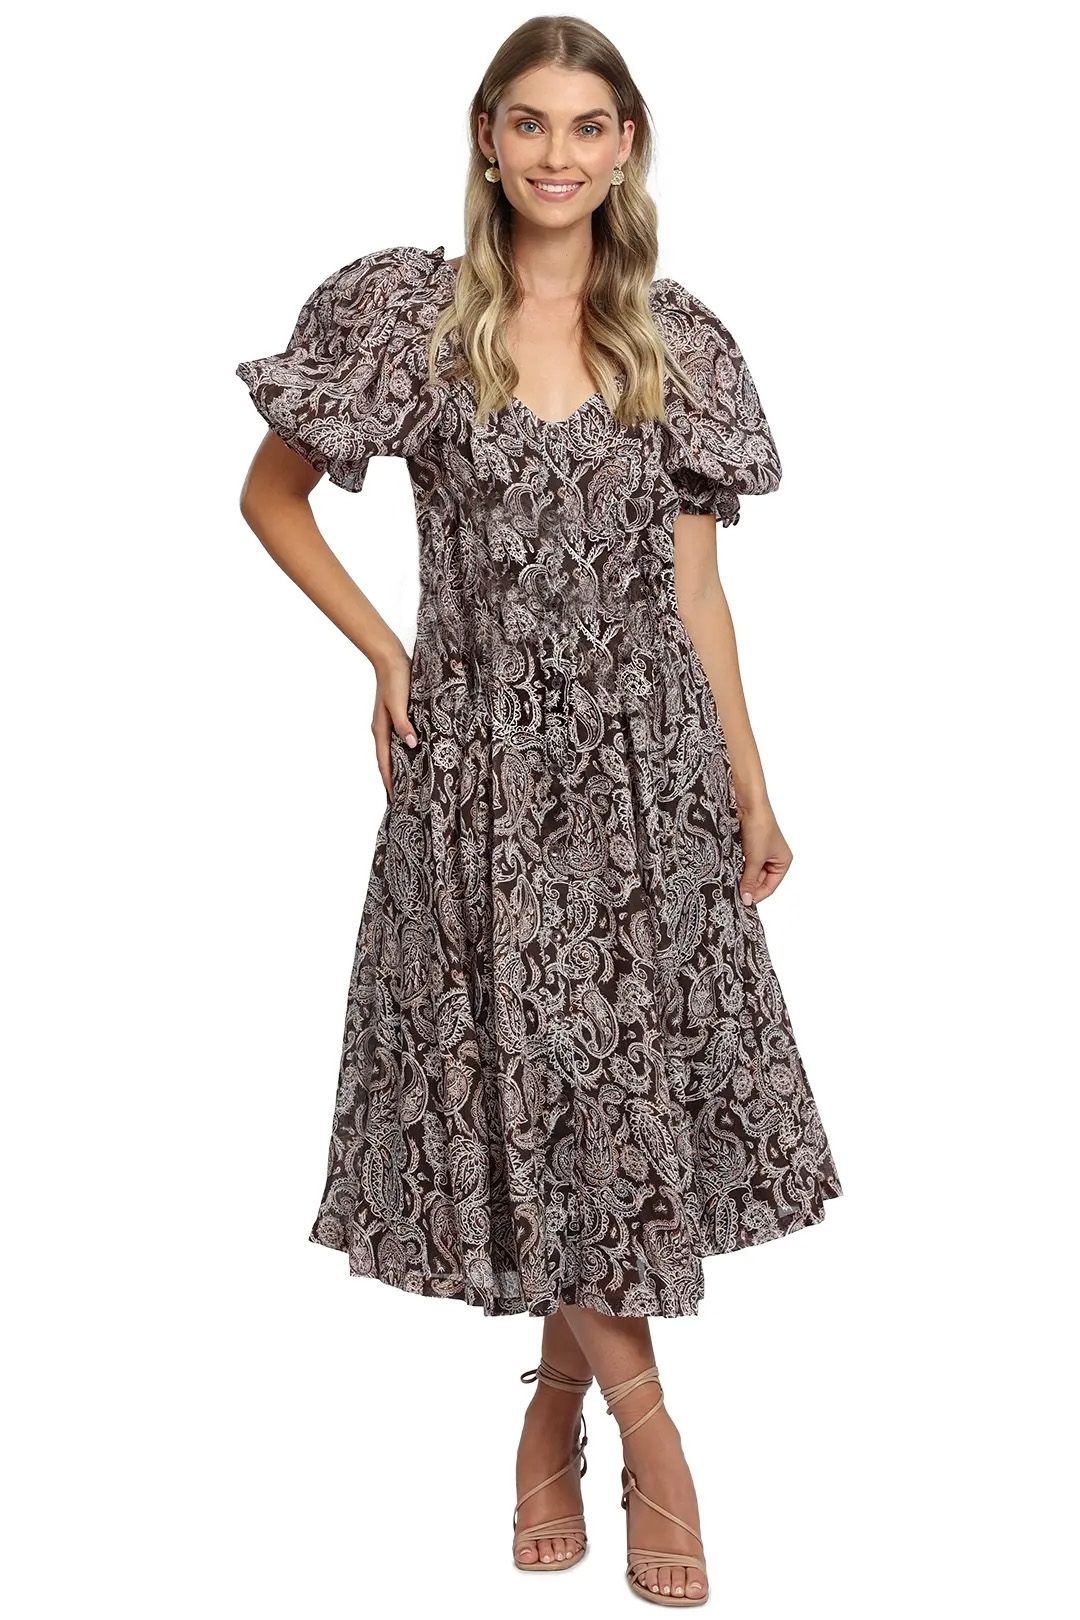 Ministry of Style Prairie Maxi Dress